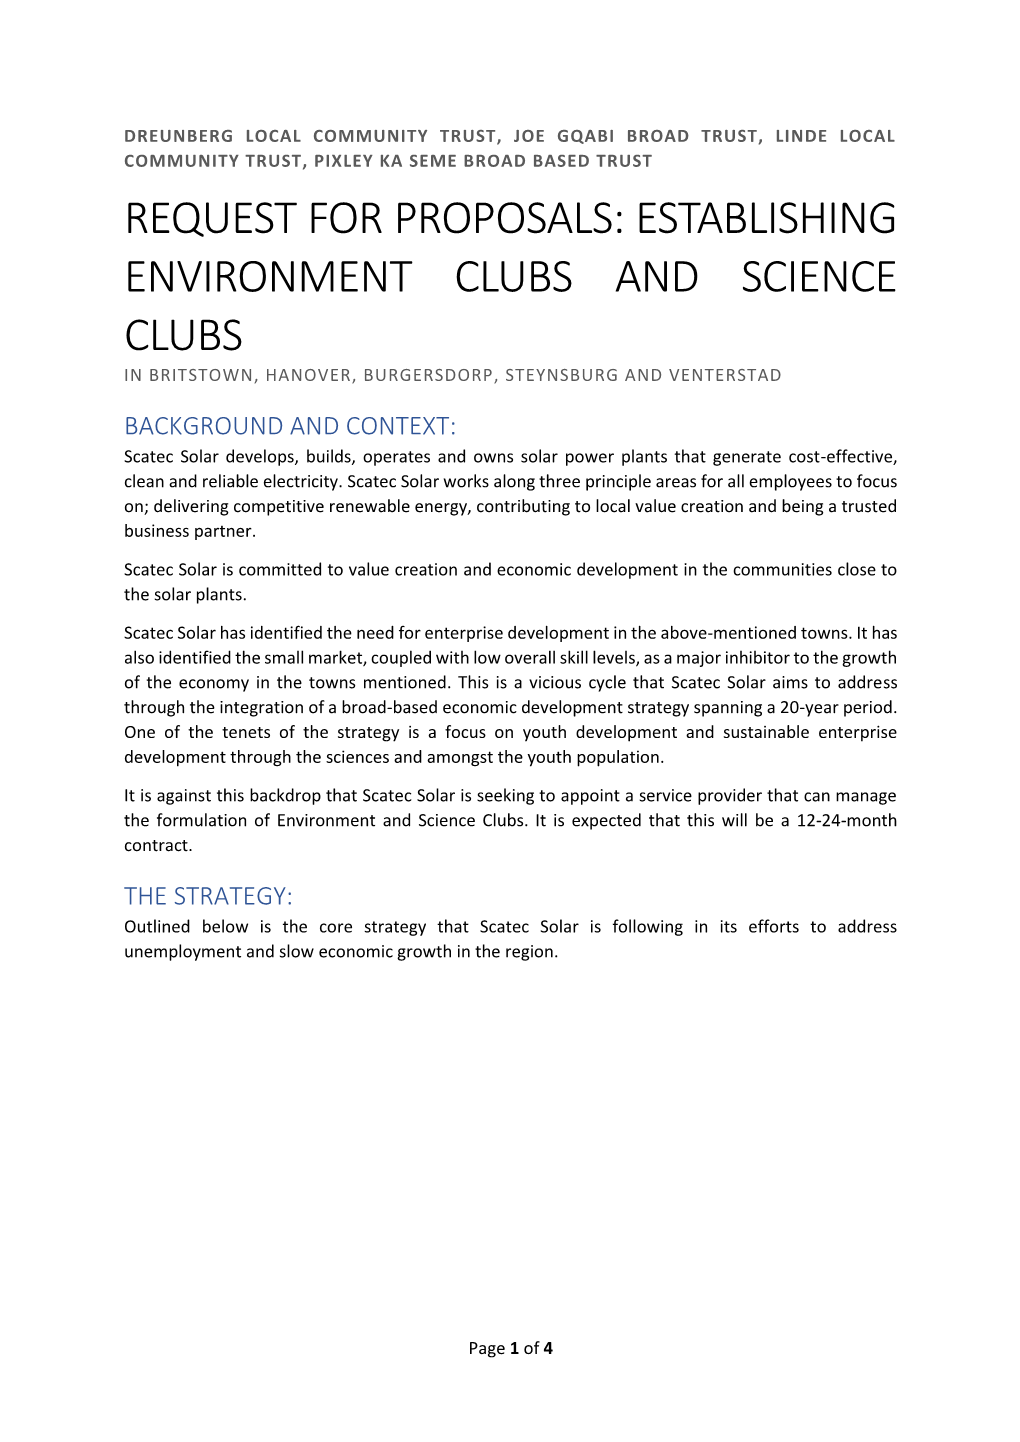 Request for Proposals: Establishing Environment Clubs and Science Clubs in Britstown, Hanover, Burgersdorp, Steynsburg and Venterstad